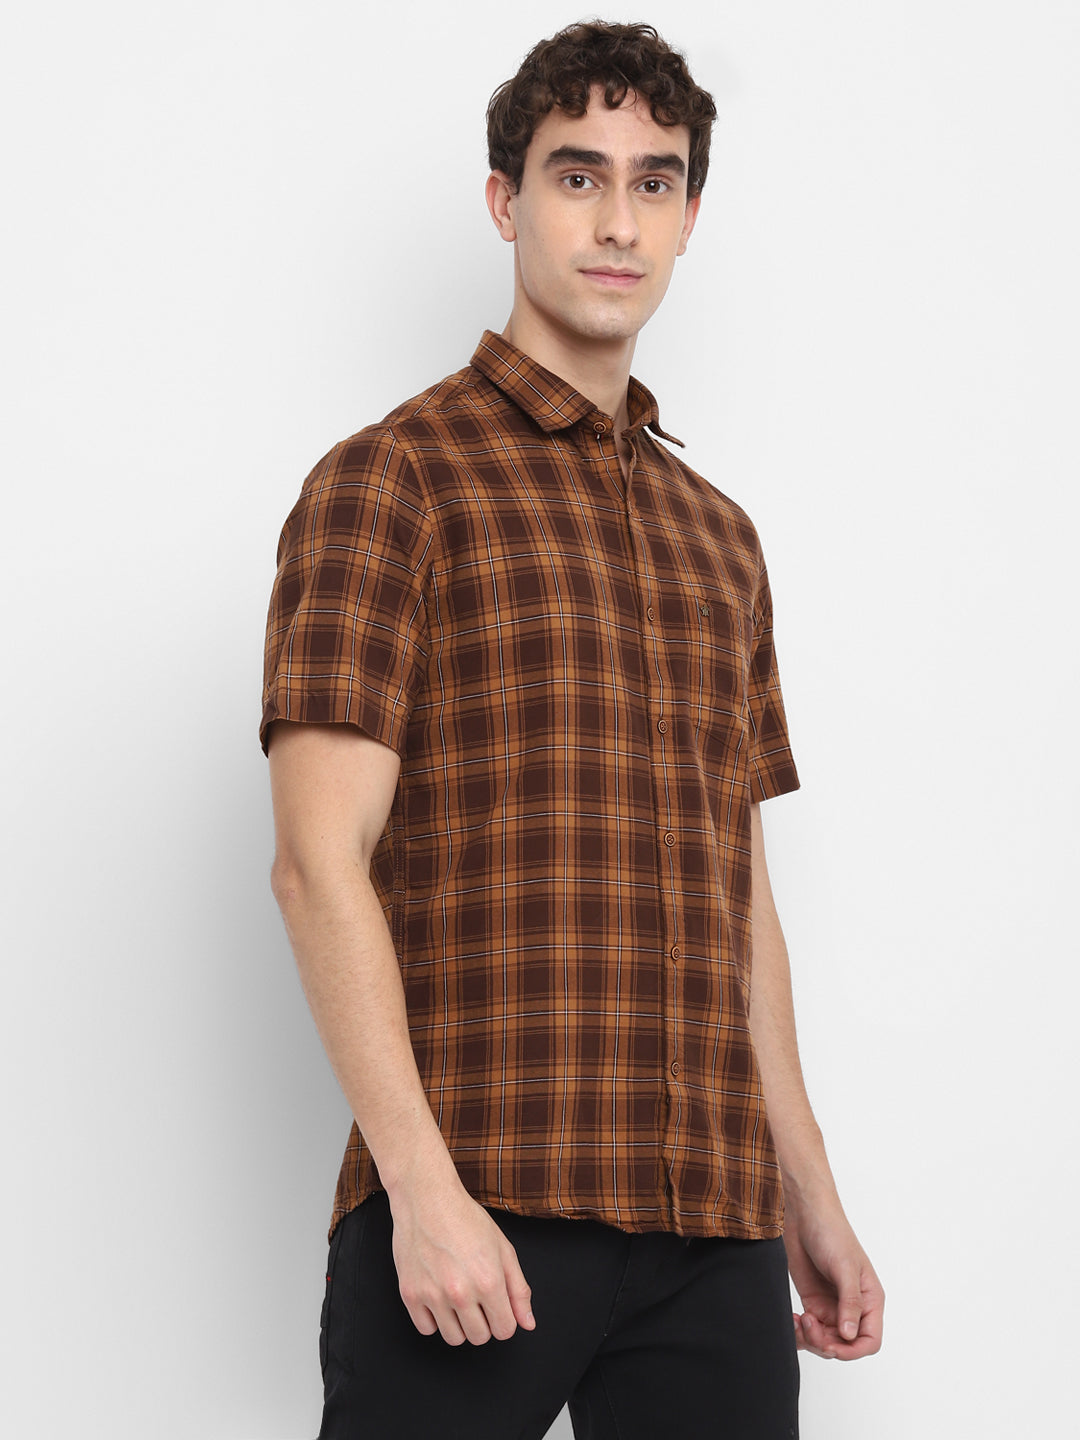 Checked Brown Slim Fit Causal Shirt